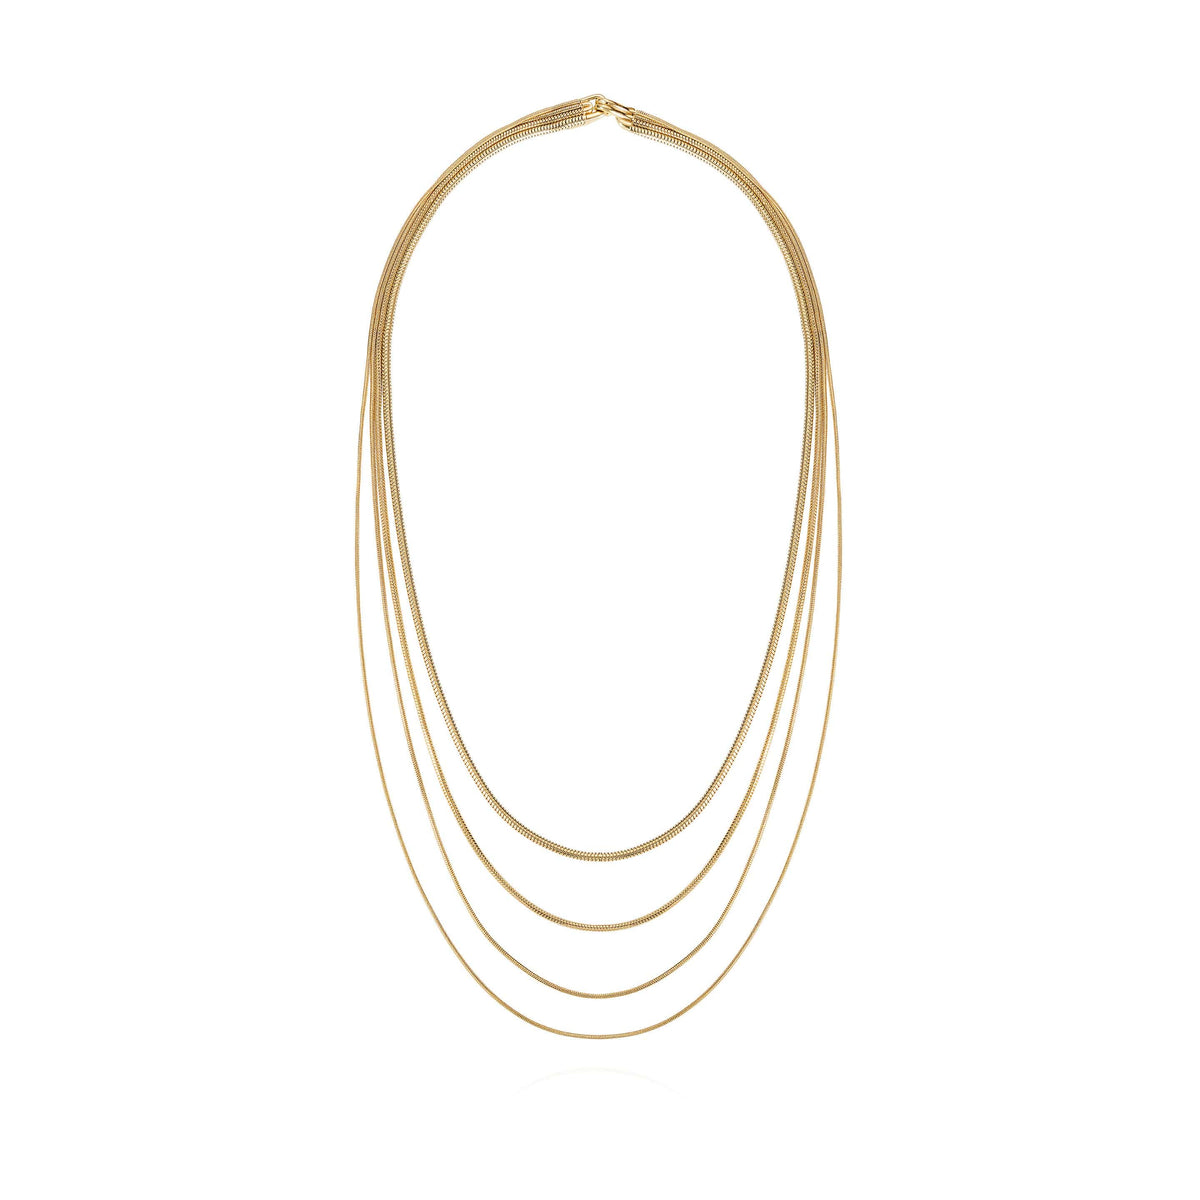 18K Yellow Gold Multi Chain Necklace